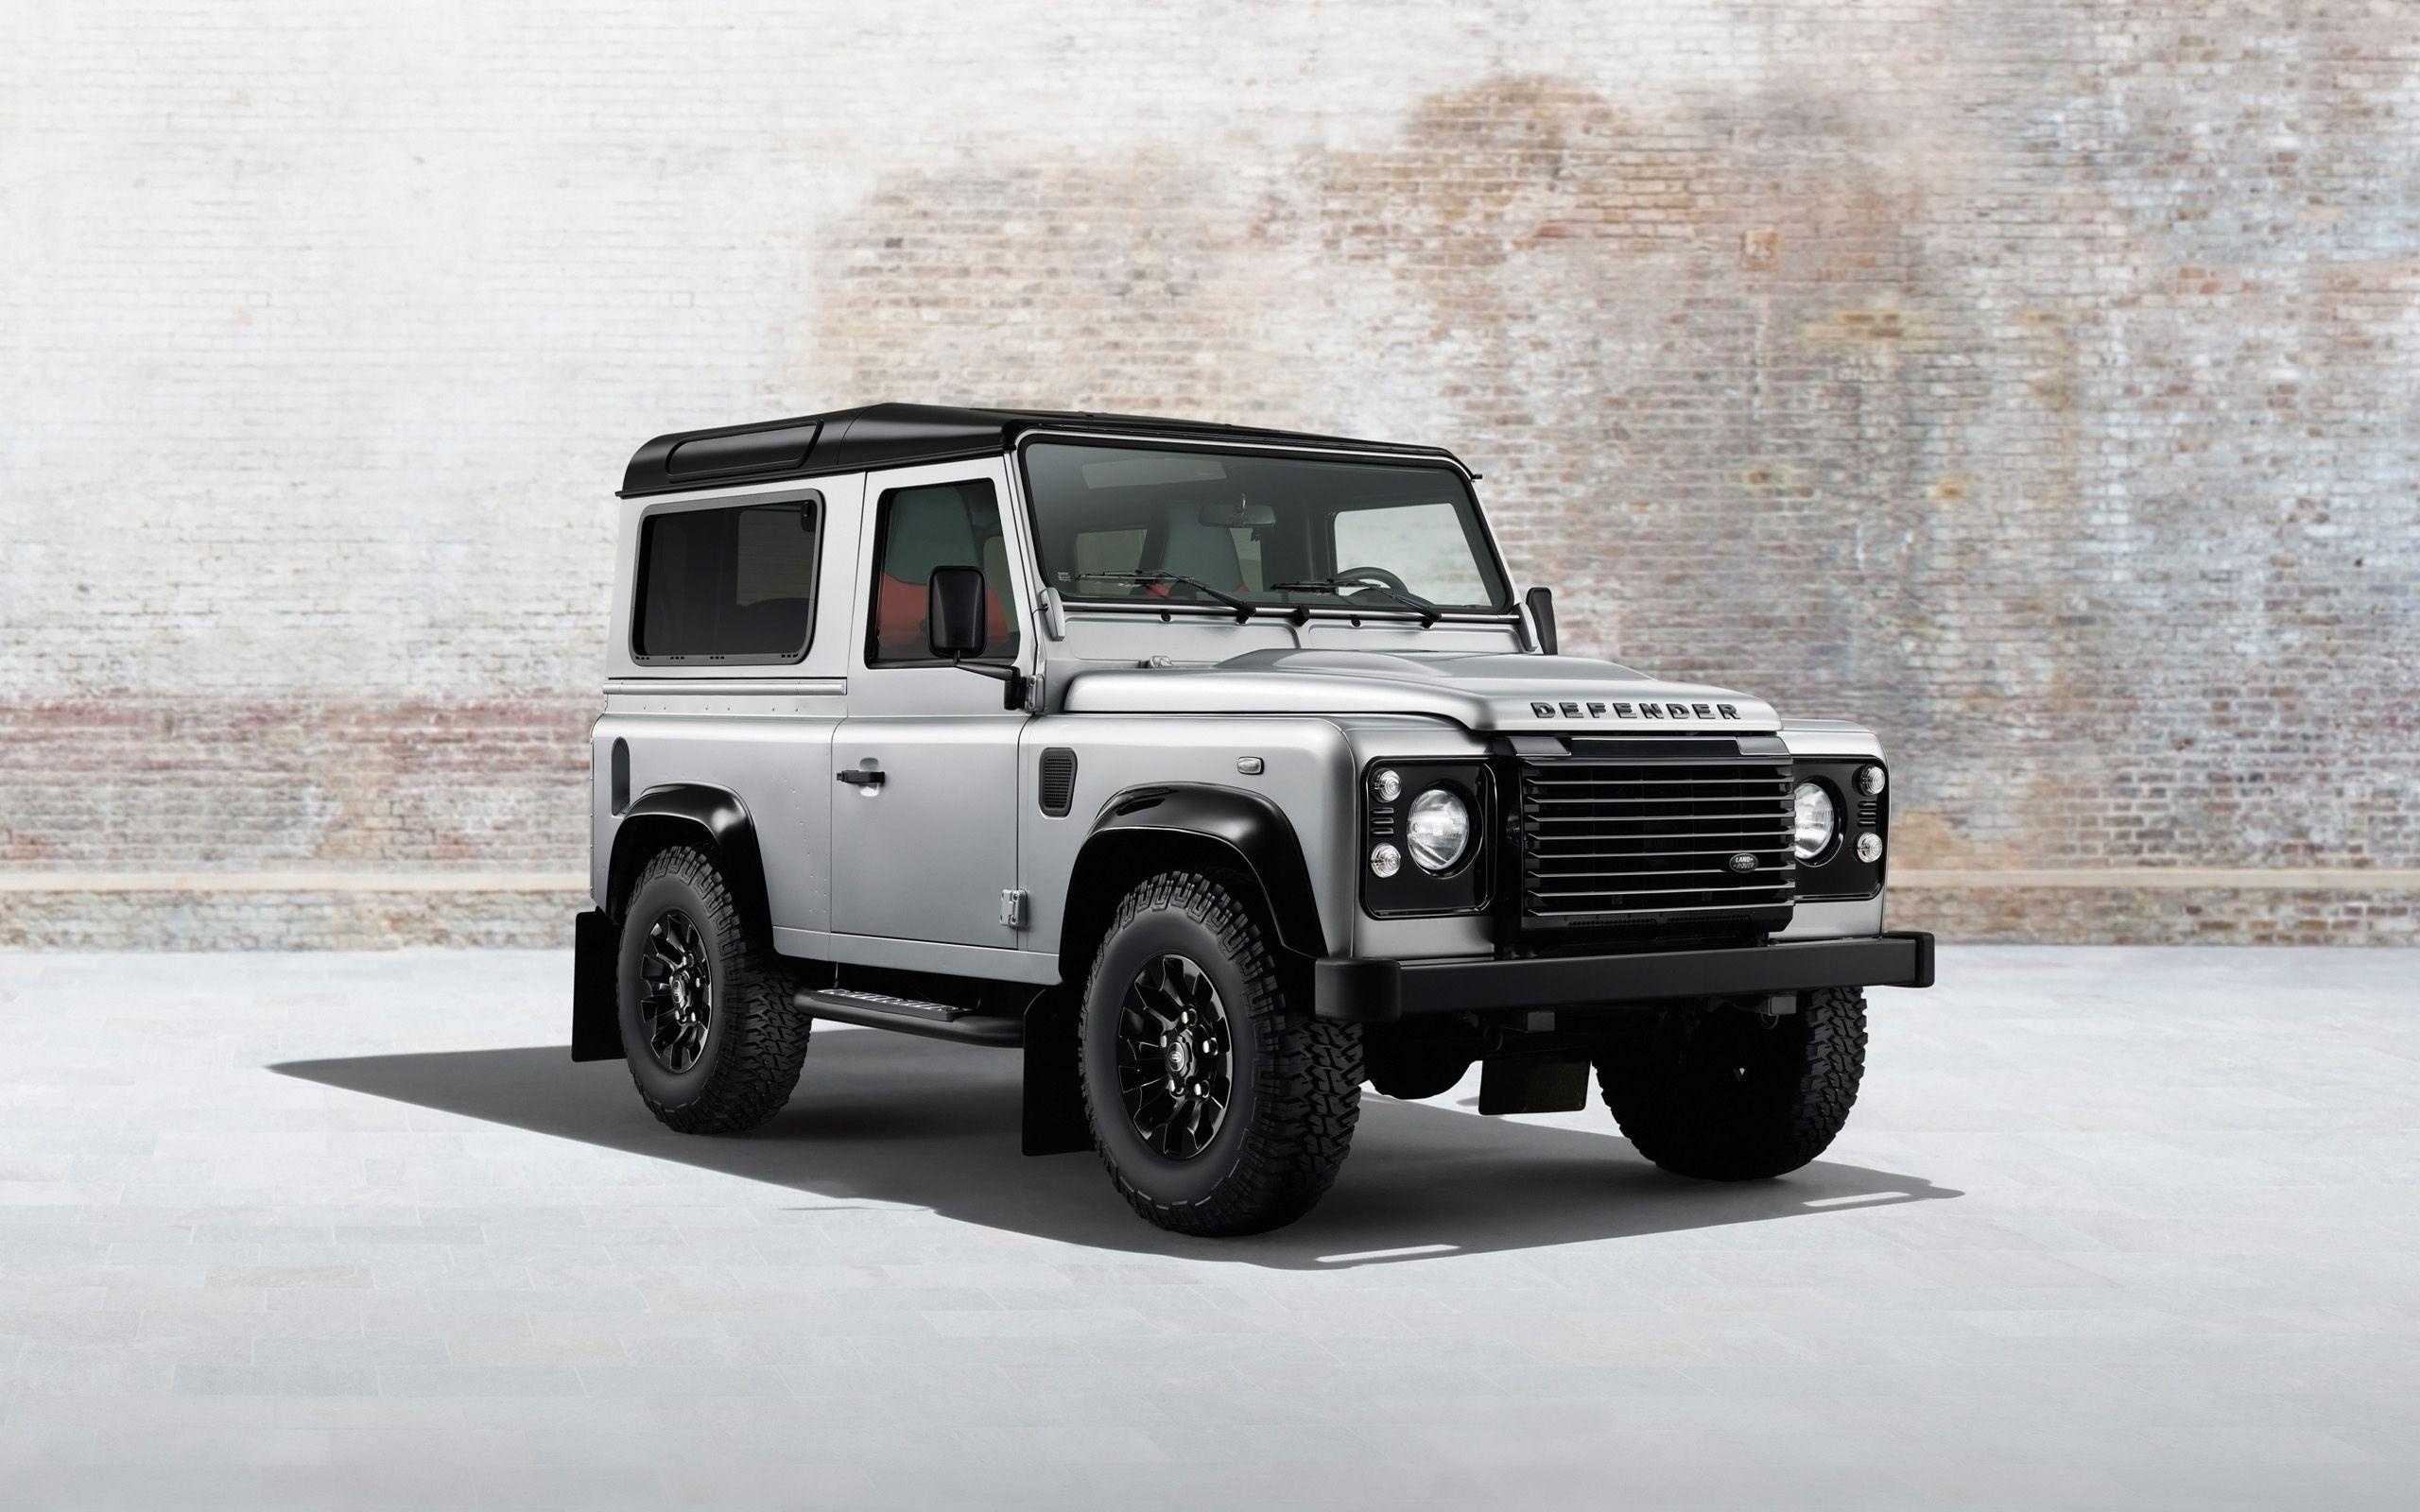 Land Rover Defender, Iconic SUV, Off-road capability, Rugged vehicle, 2560x1600 HD Desktop